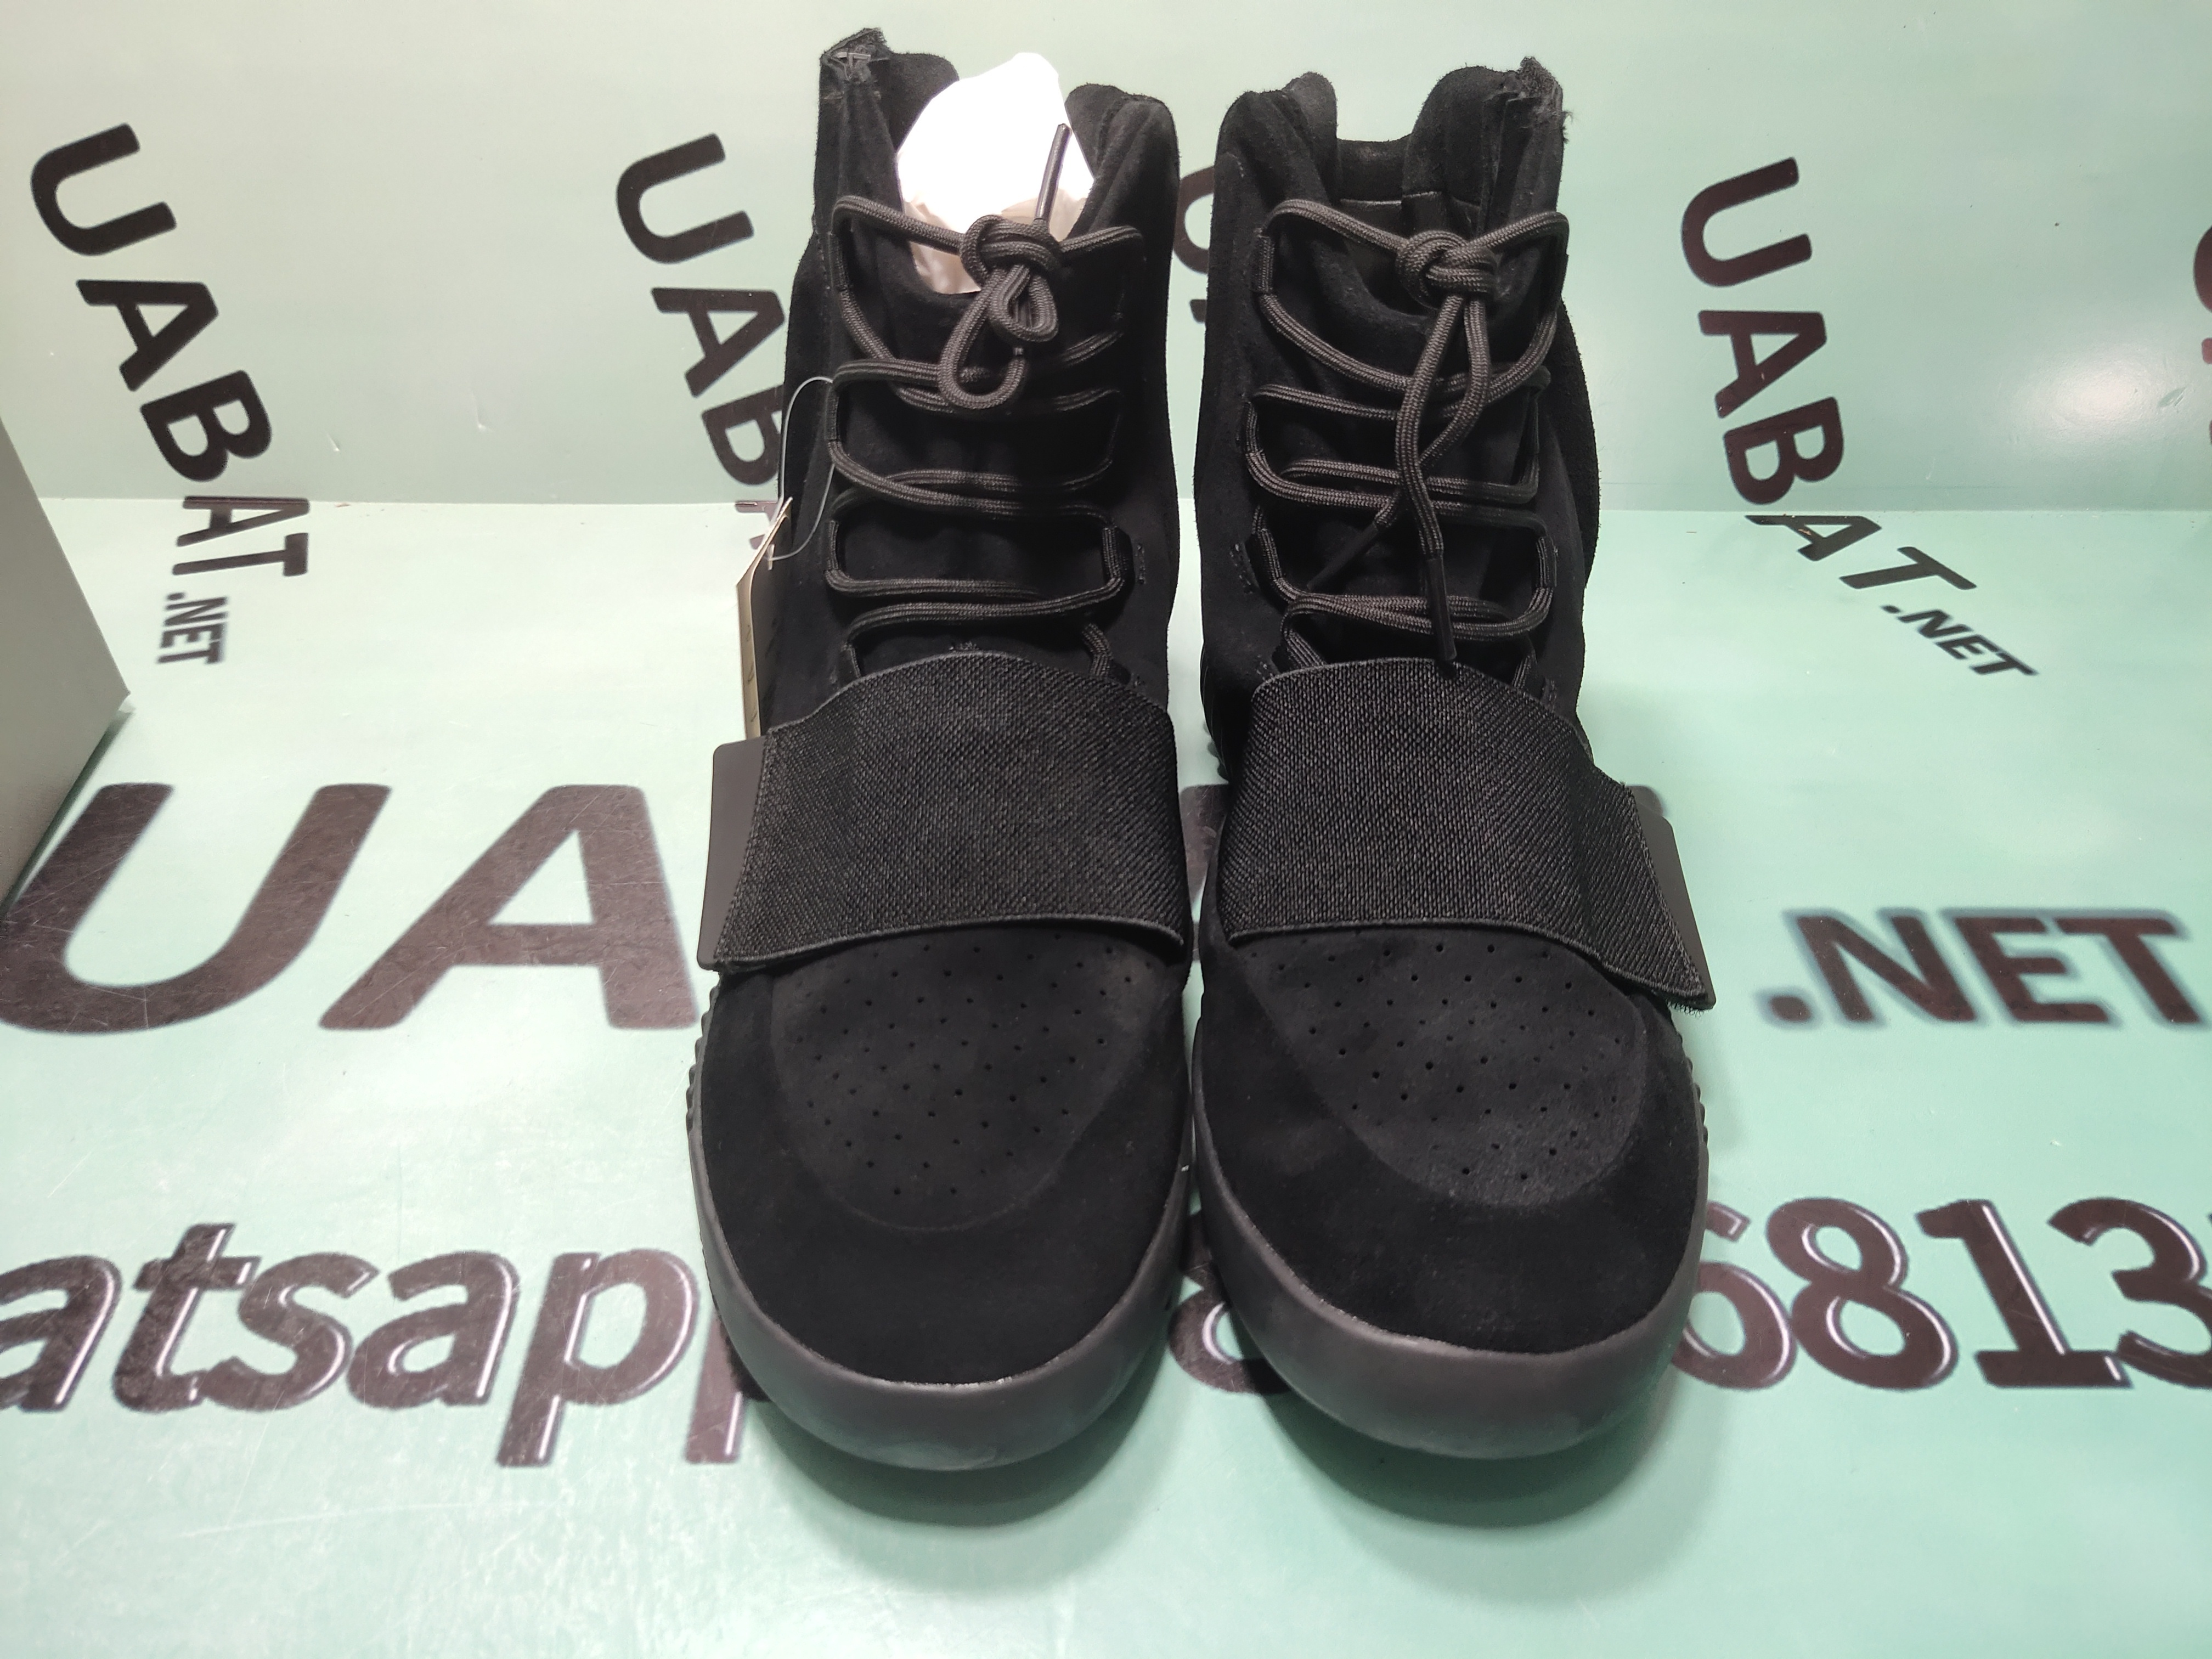 TOP Quality ArvindShops Yeezy Boost 750 Black, adidas db0273 shoes black sneakers -